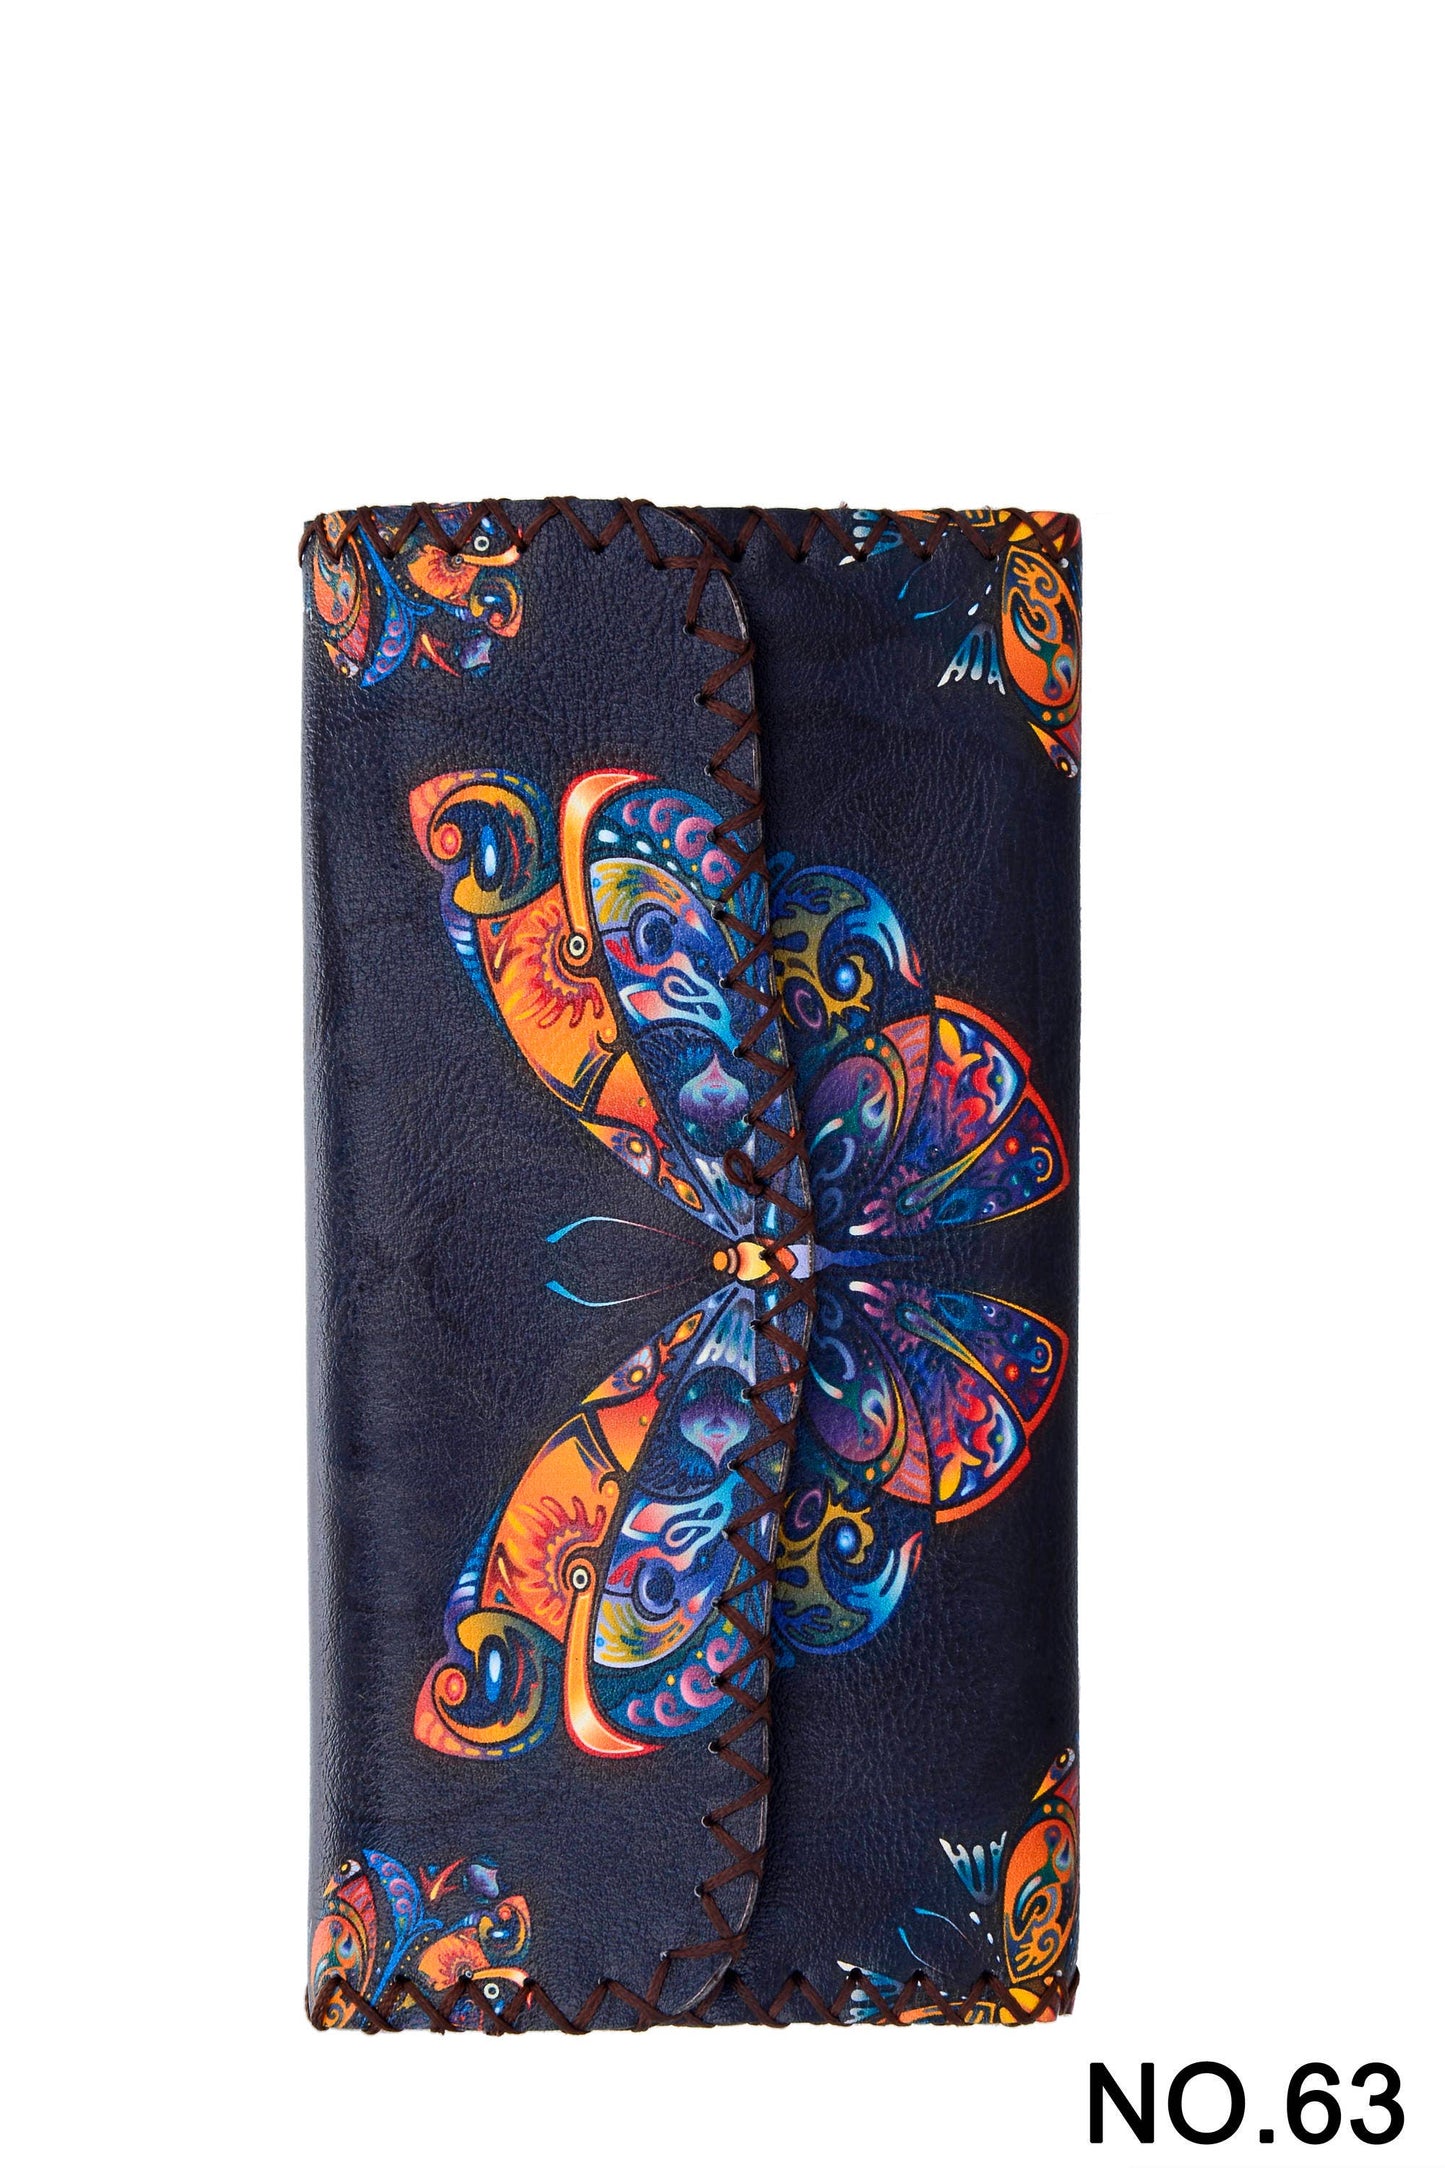 Ole - Butterfly Printed Wallet HB0582 - NO.63